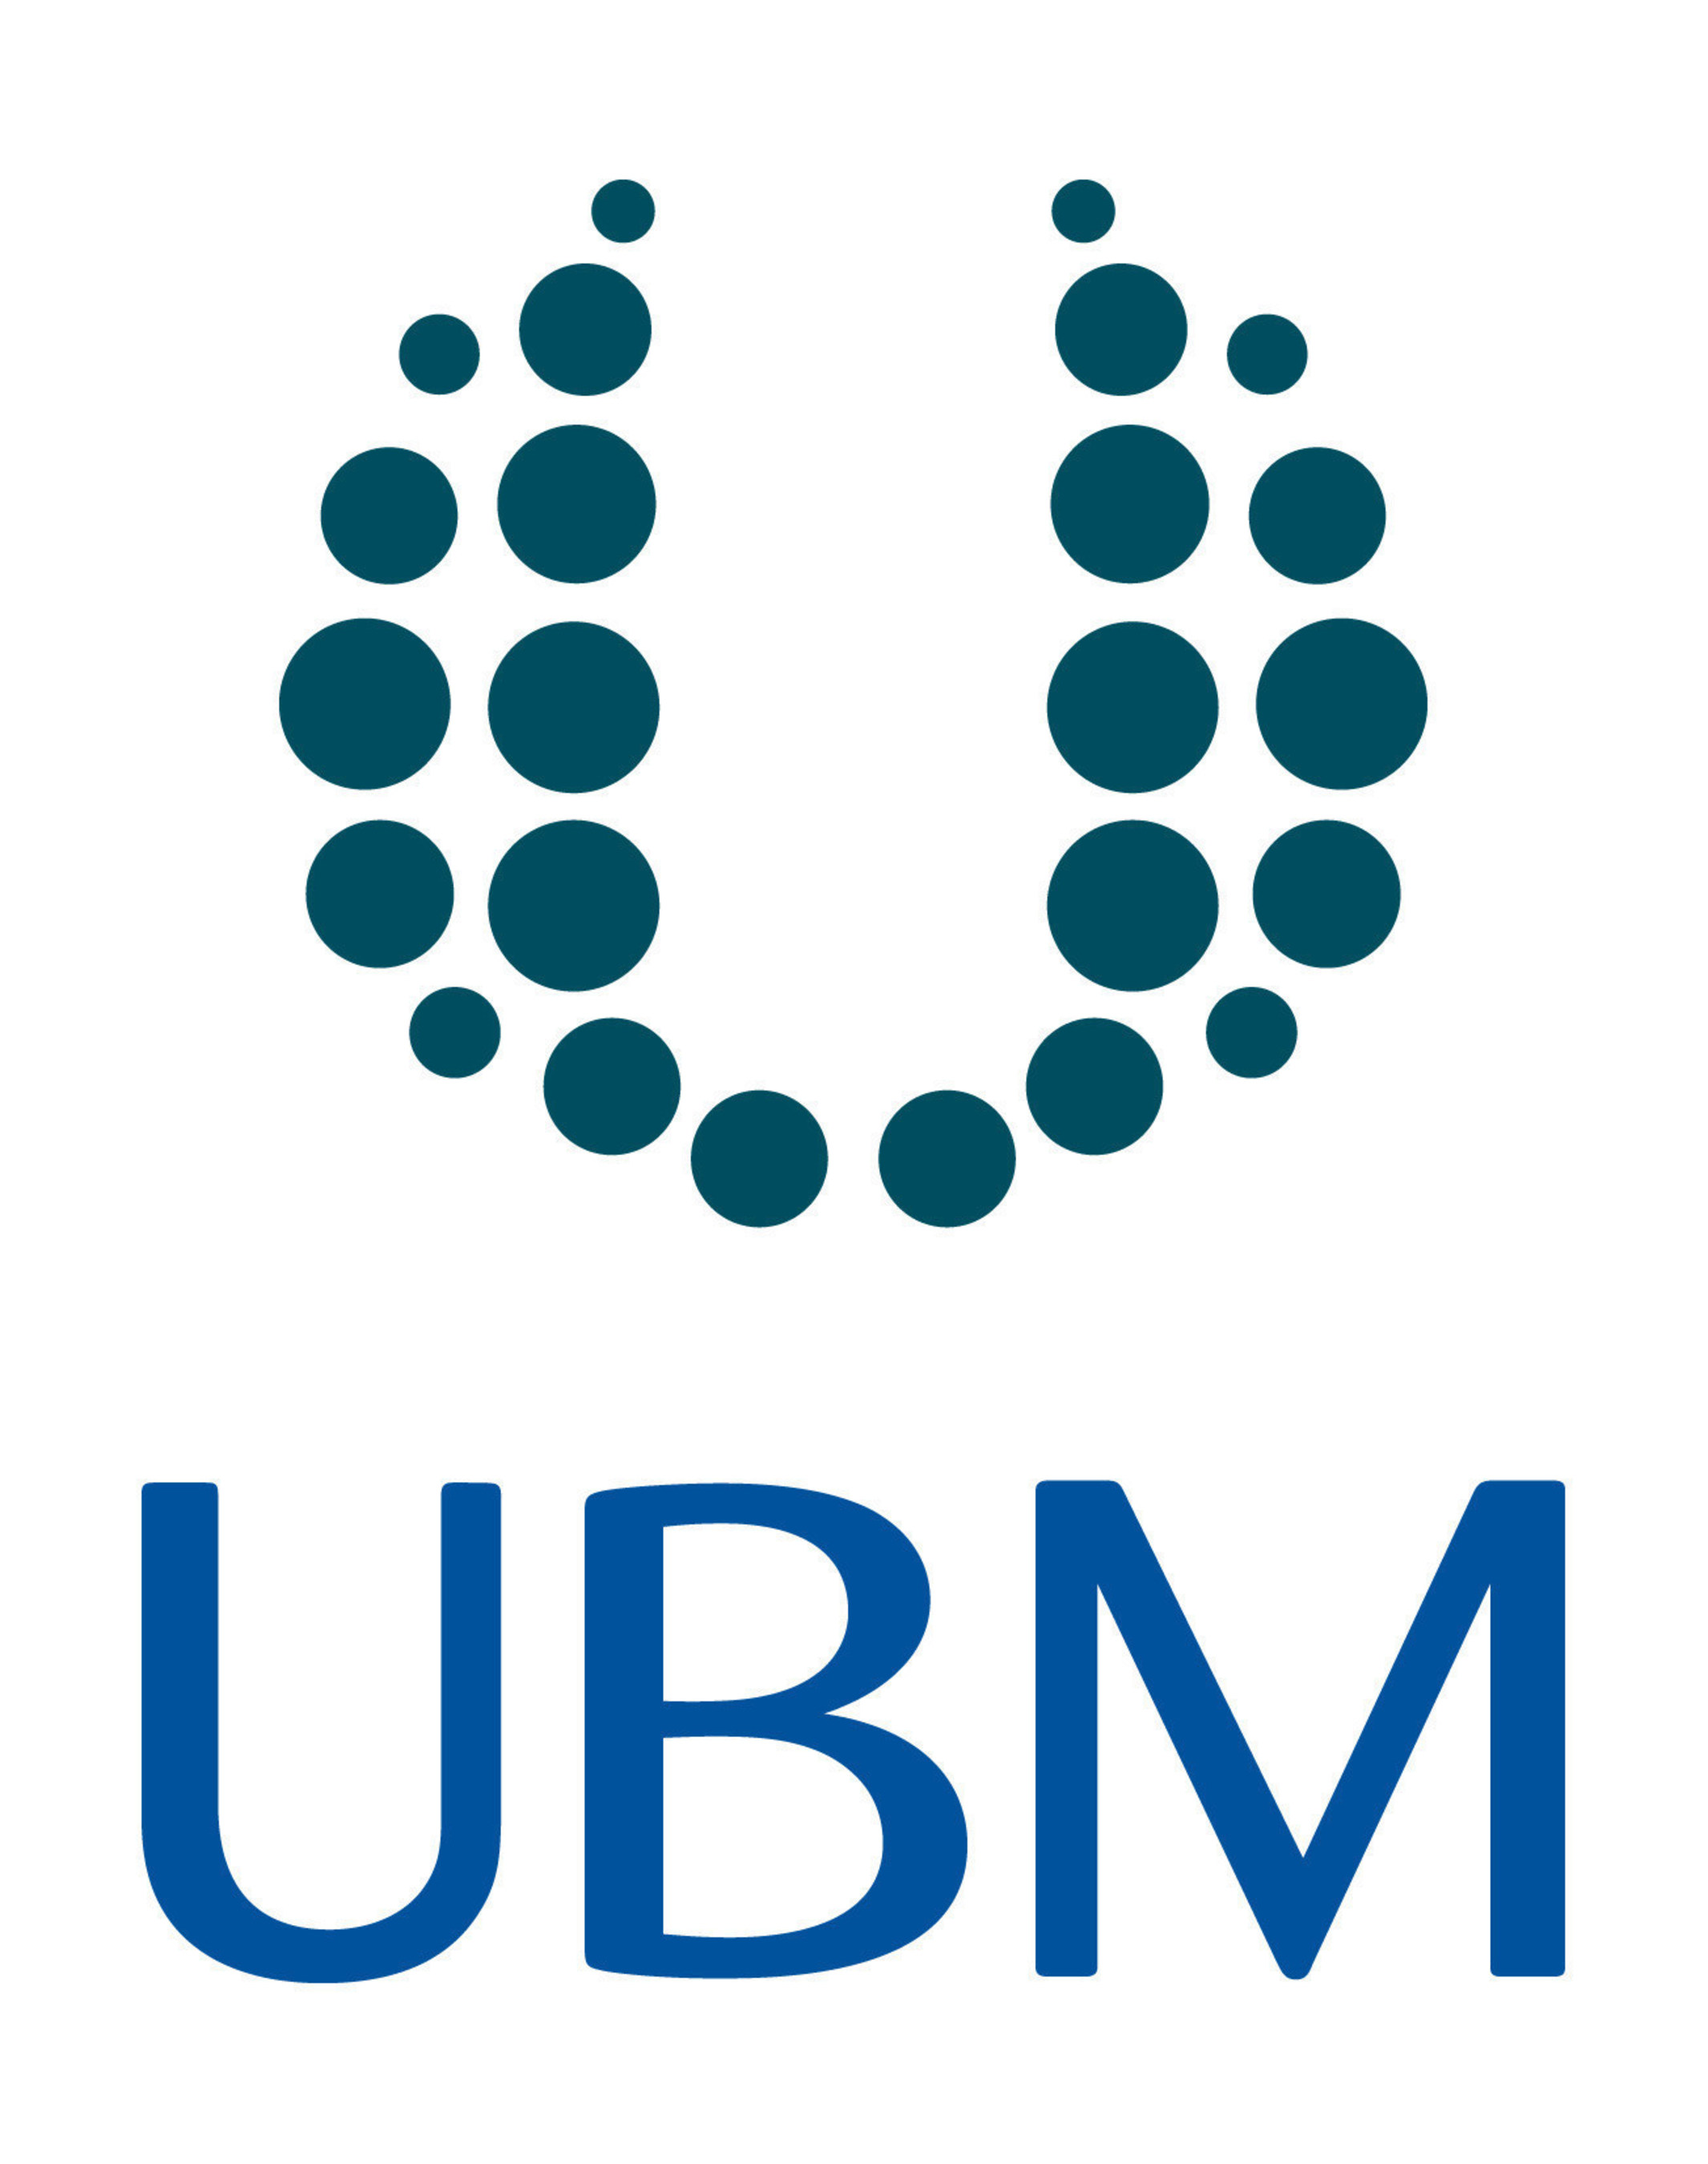 UBM plc announces the sale of PR Newswire to Cision for $841m and proposes to return £245m to shareholders